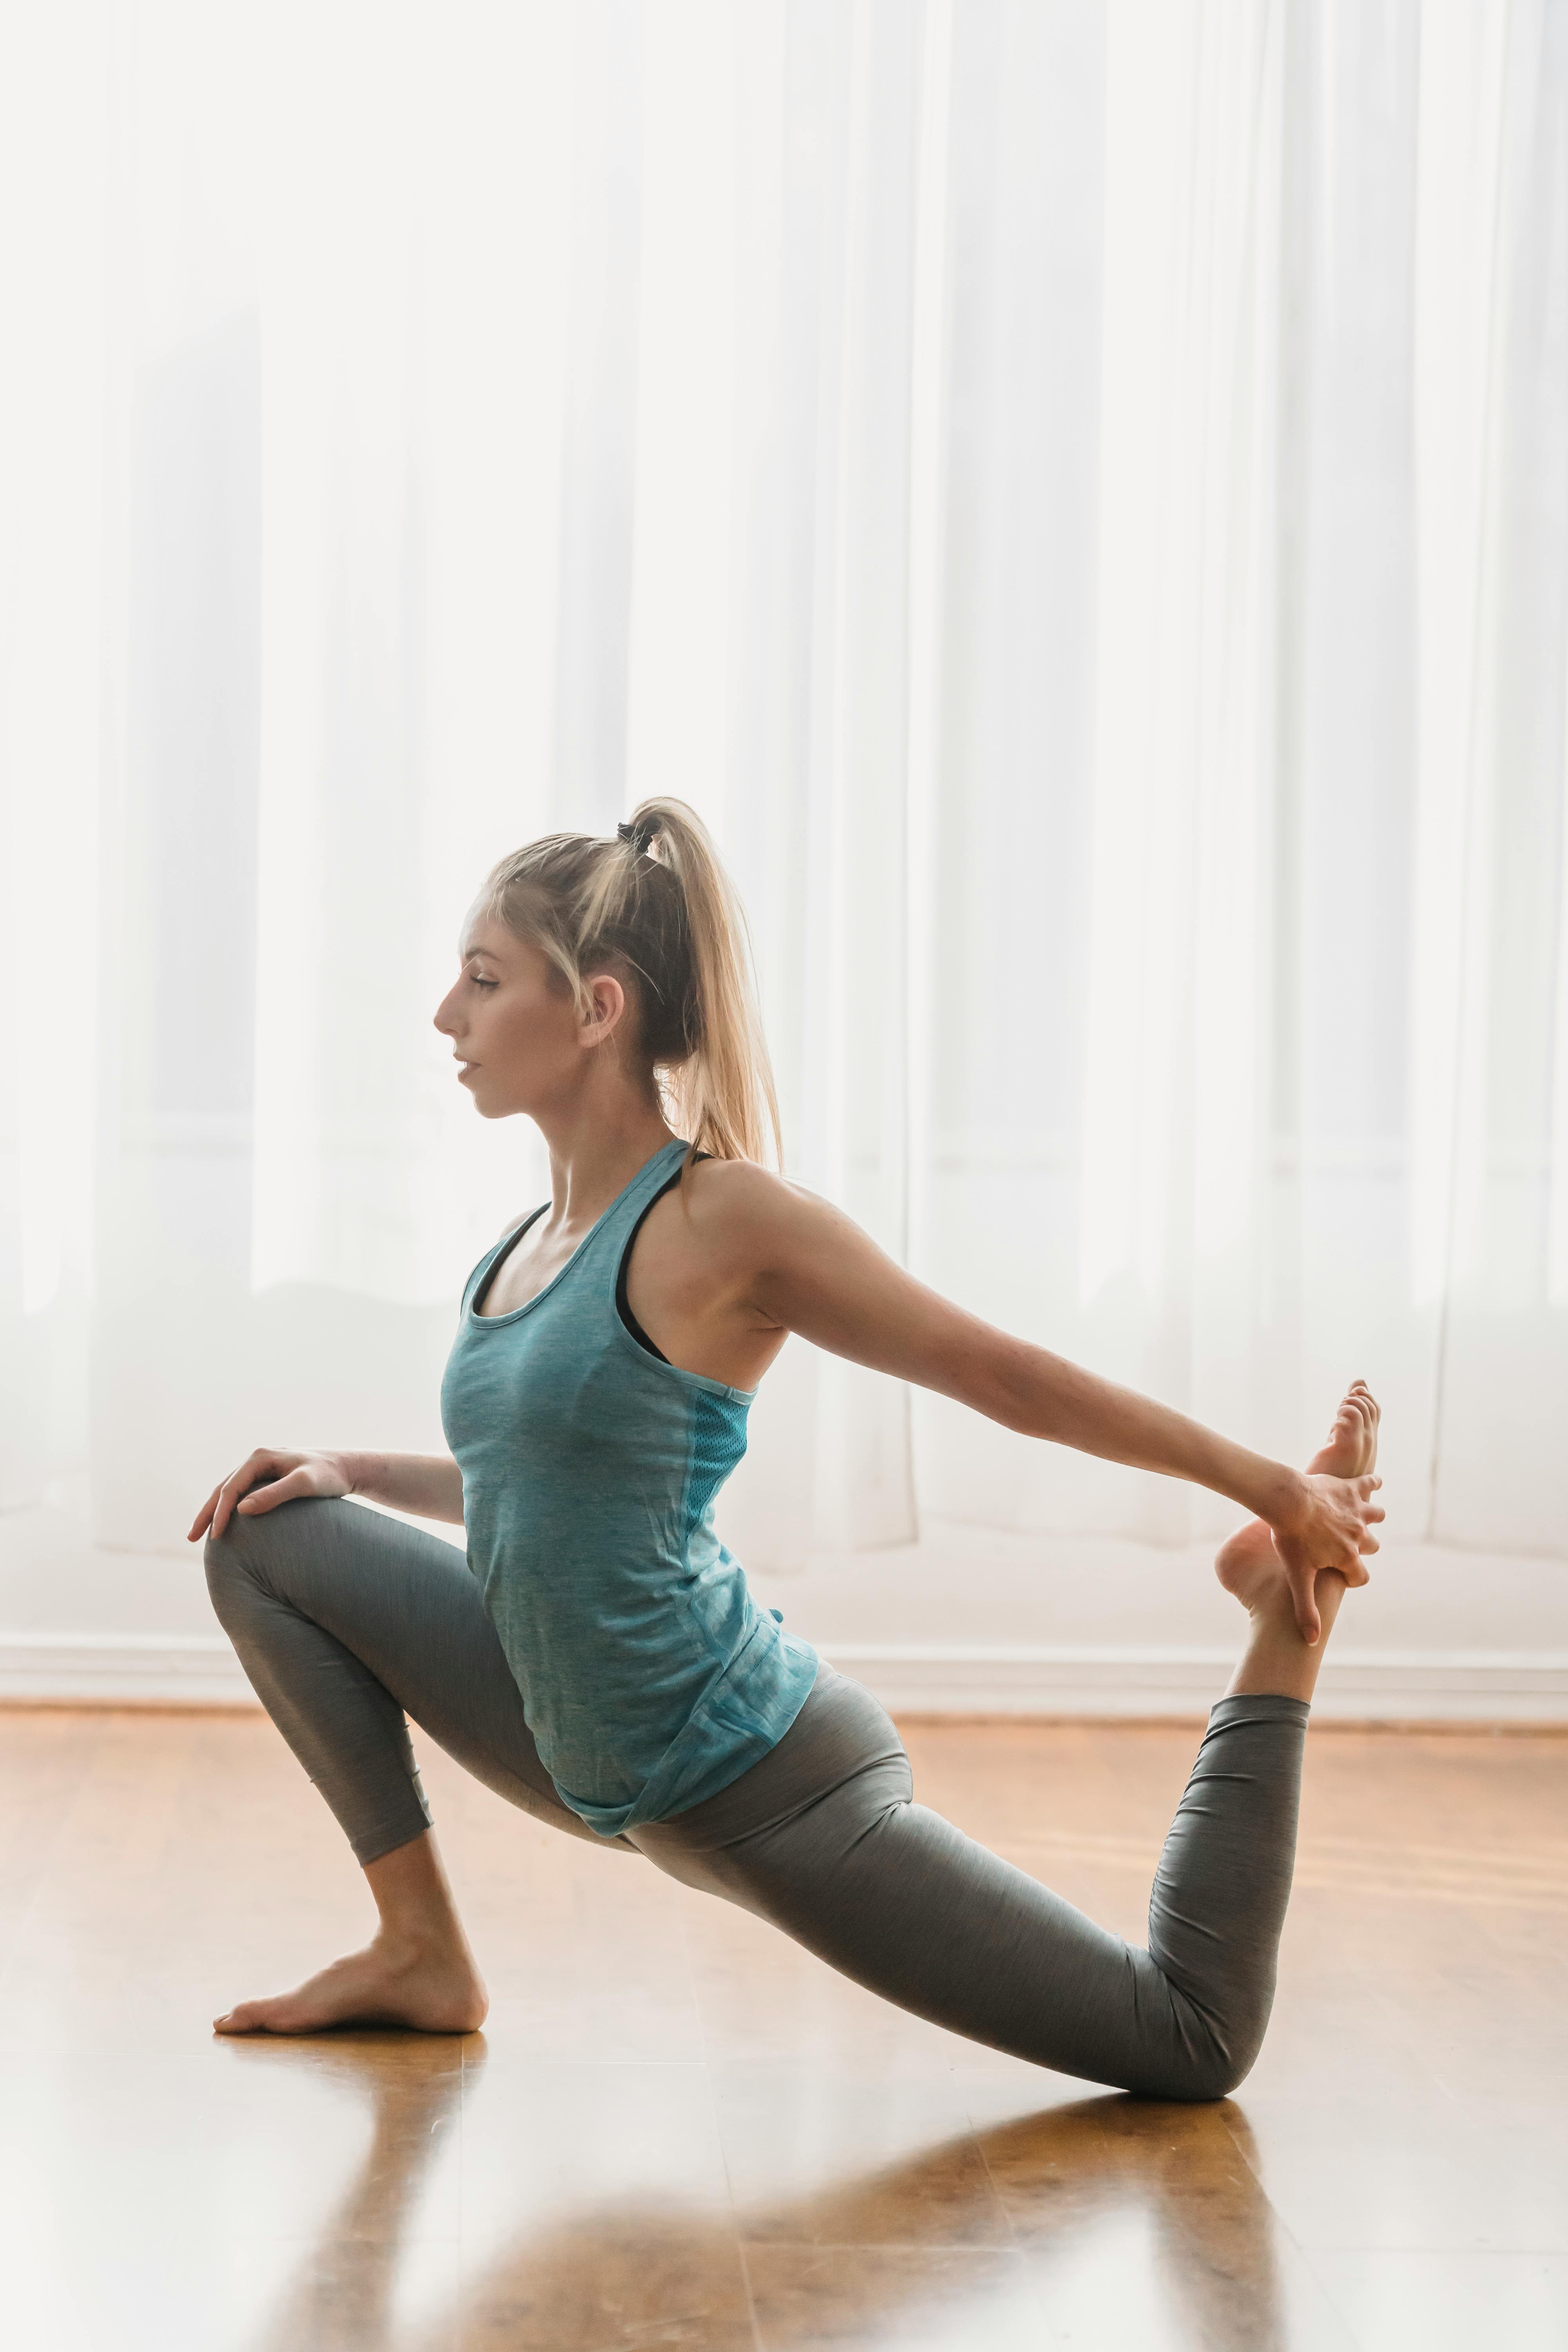 Flexible woman doing Crescent Lunge on Knee · Free Stock Photo